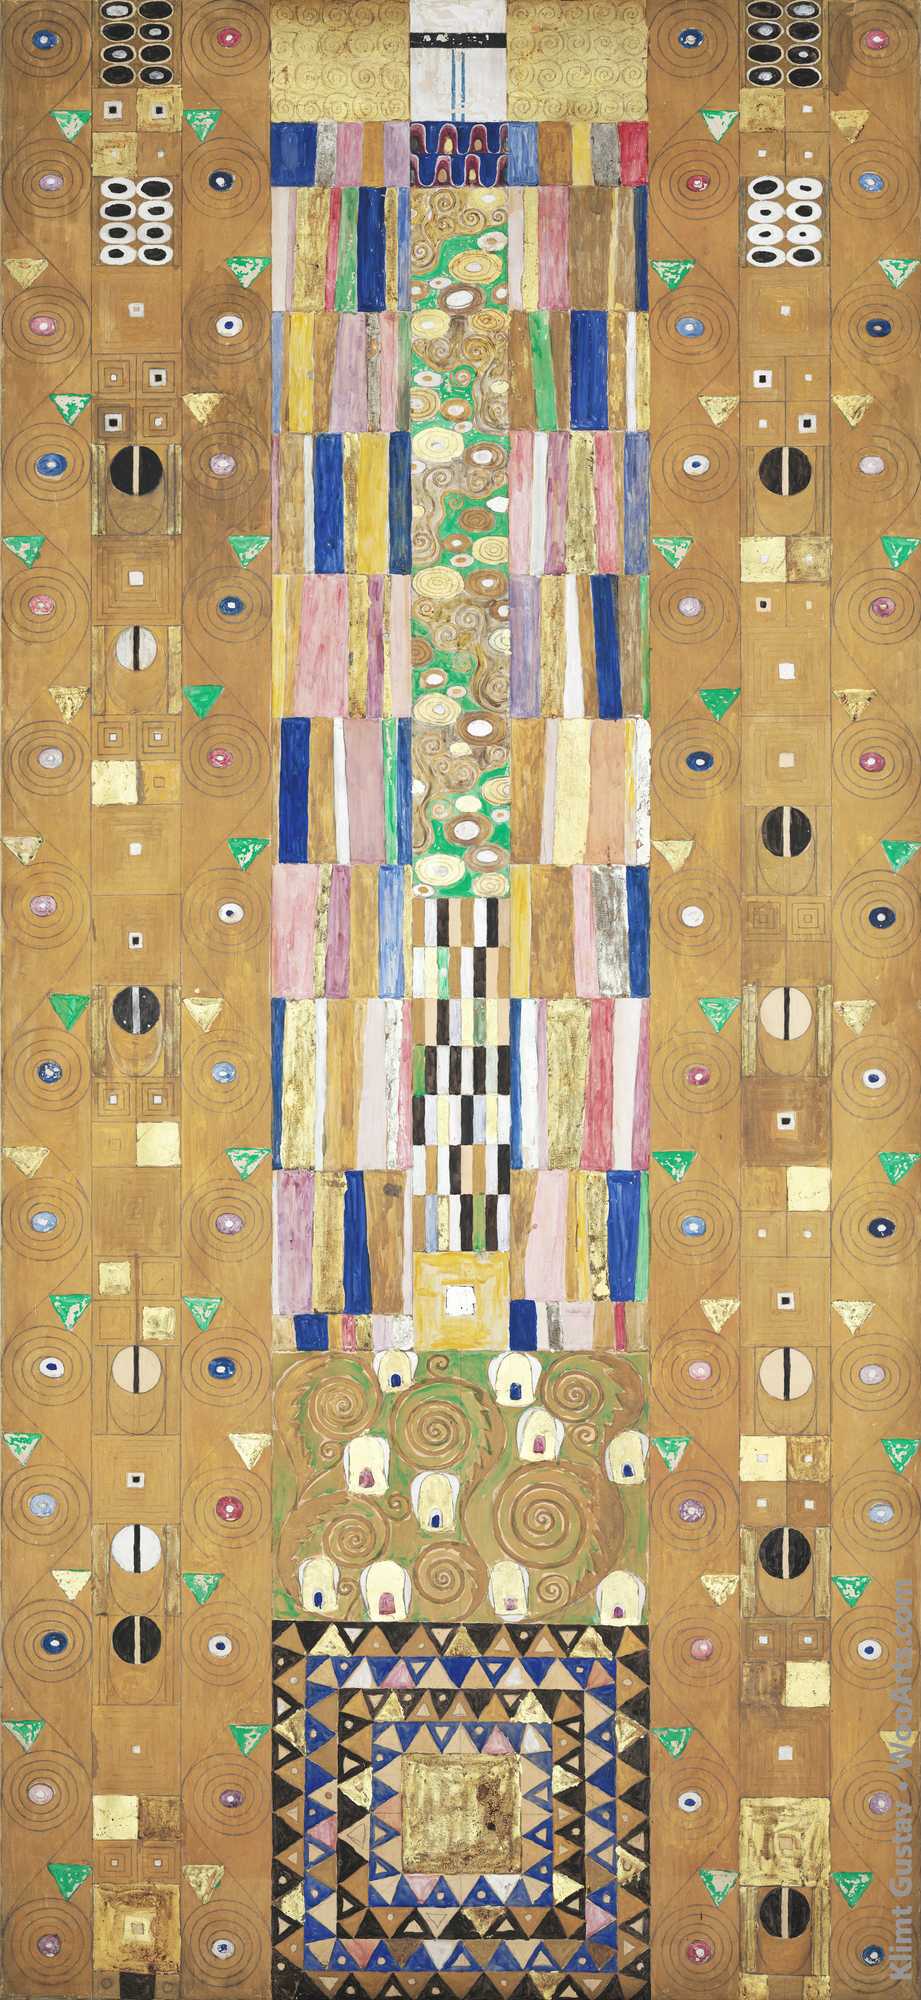 Nine Cartoons for the Execution of a Frieze for the Dining Room of Stoclet House in Brussels - Part 9, Knight Gustav Klimt 1910–1911